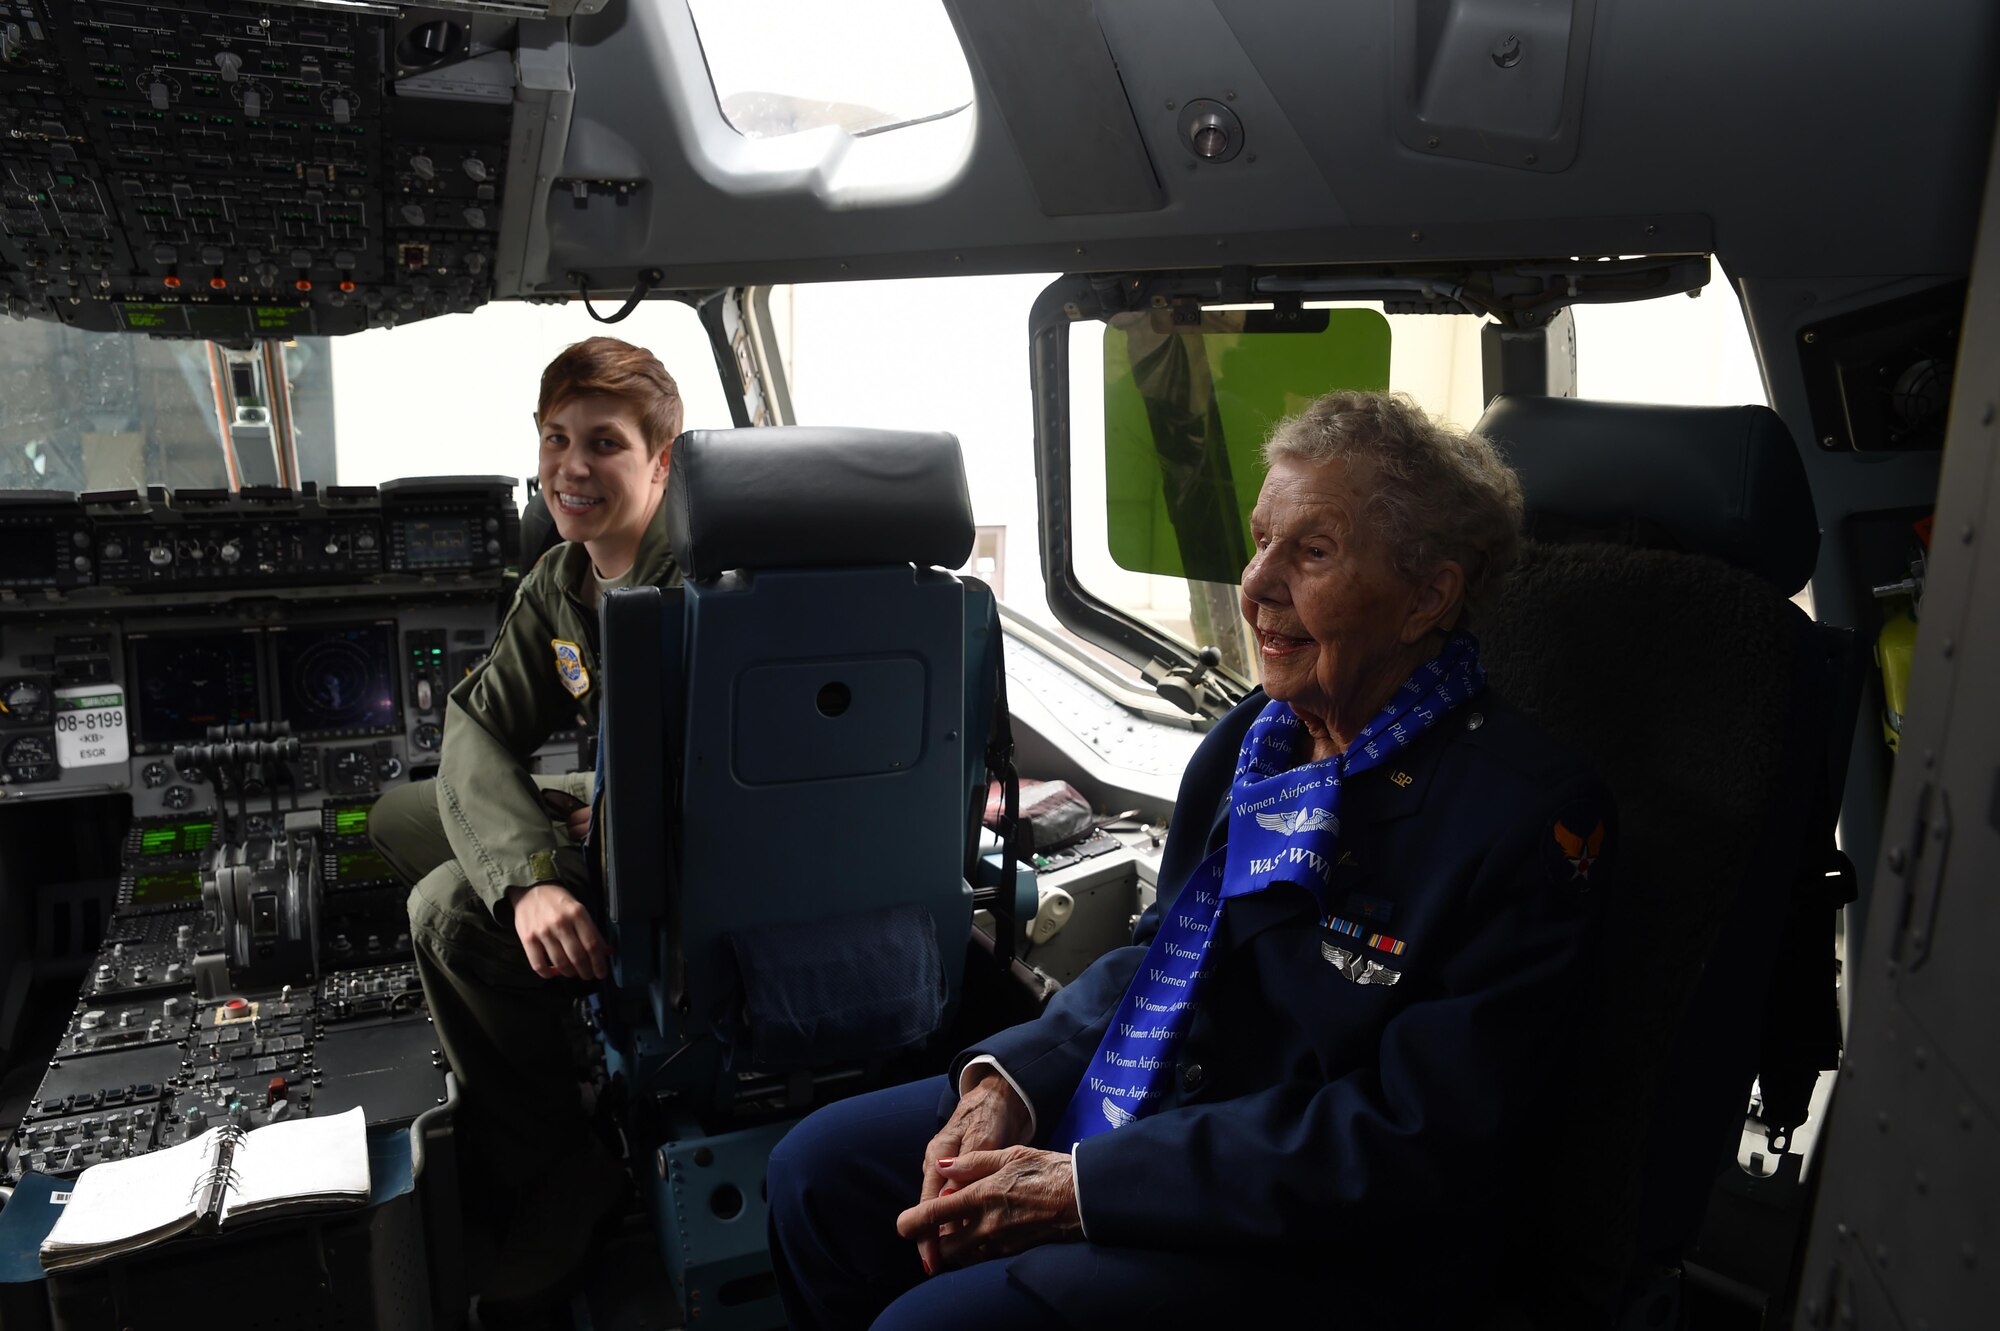 (From left) Maj. Kathryn Benson, McChord C-17 pilot, and Dorothy Olsen, former Women Airforce Service Pilot, sit in the cock-pit of a C-17 Globemaster III on the McChord Field flight line July 10, 2016. Olsen celebrated her 100th birthday at McChord with three fellow WASPs and family. Olsen was also reunited with one of her favorite aircraft’s, the P-51 Mustang. (Air Force Photo/Staff Sgt. Naomi Shipley)